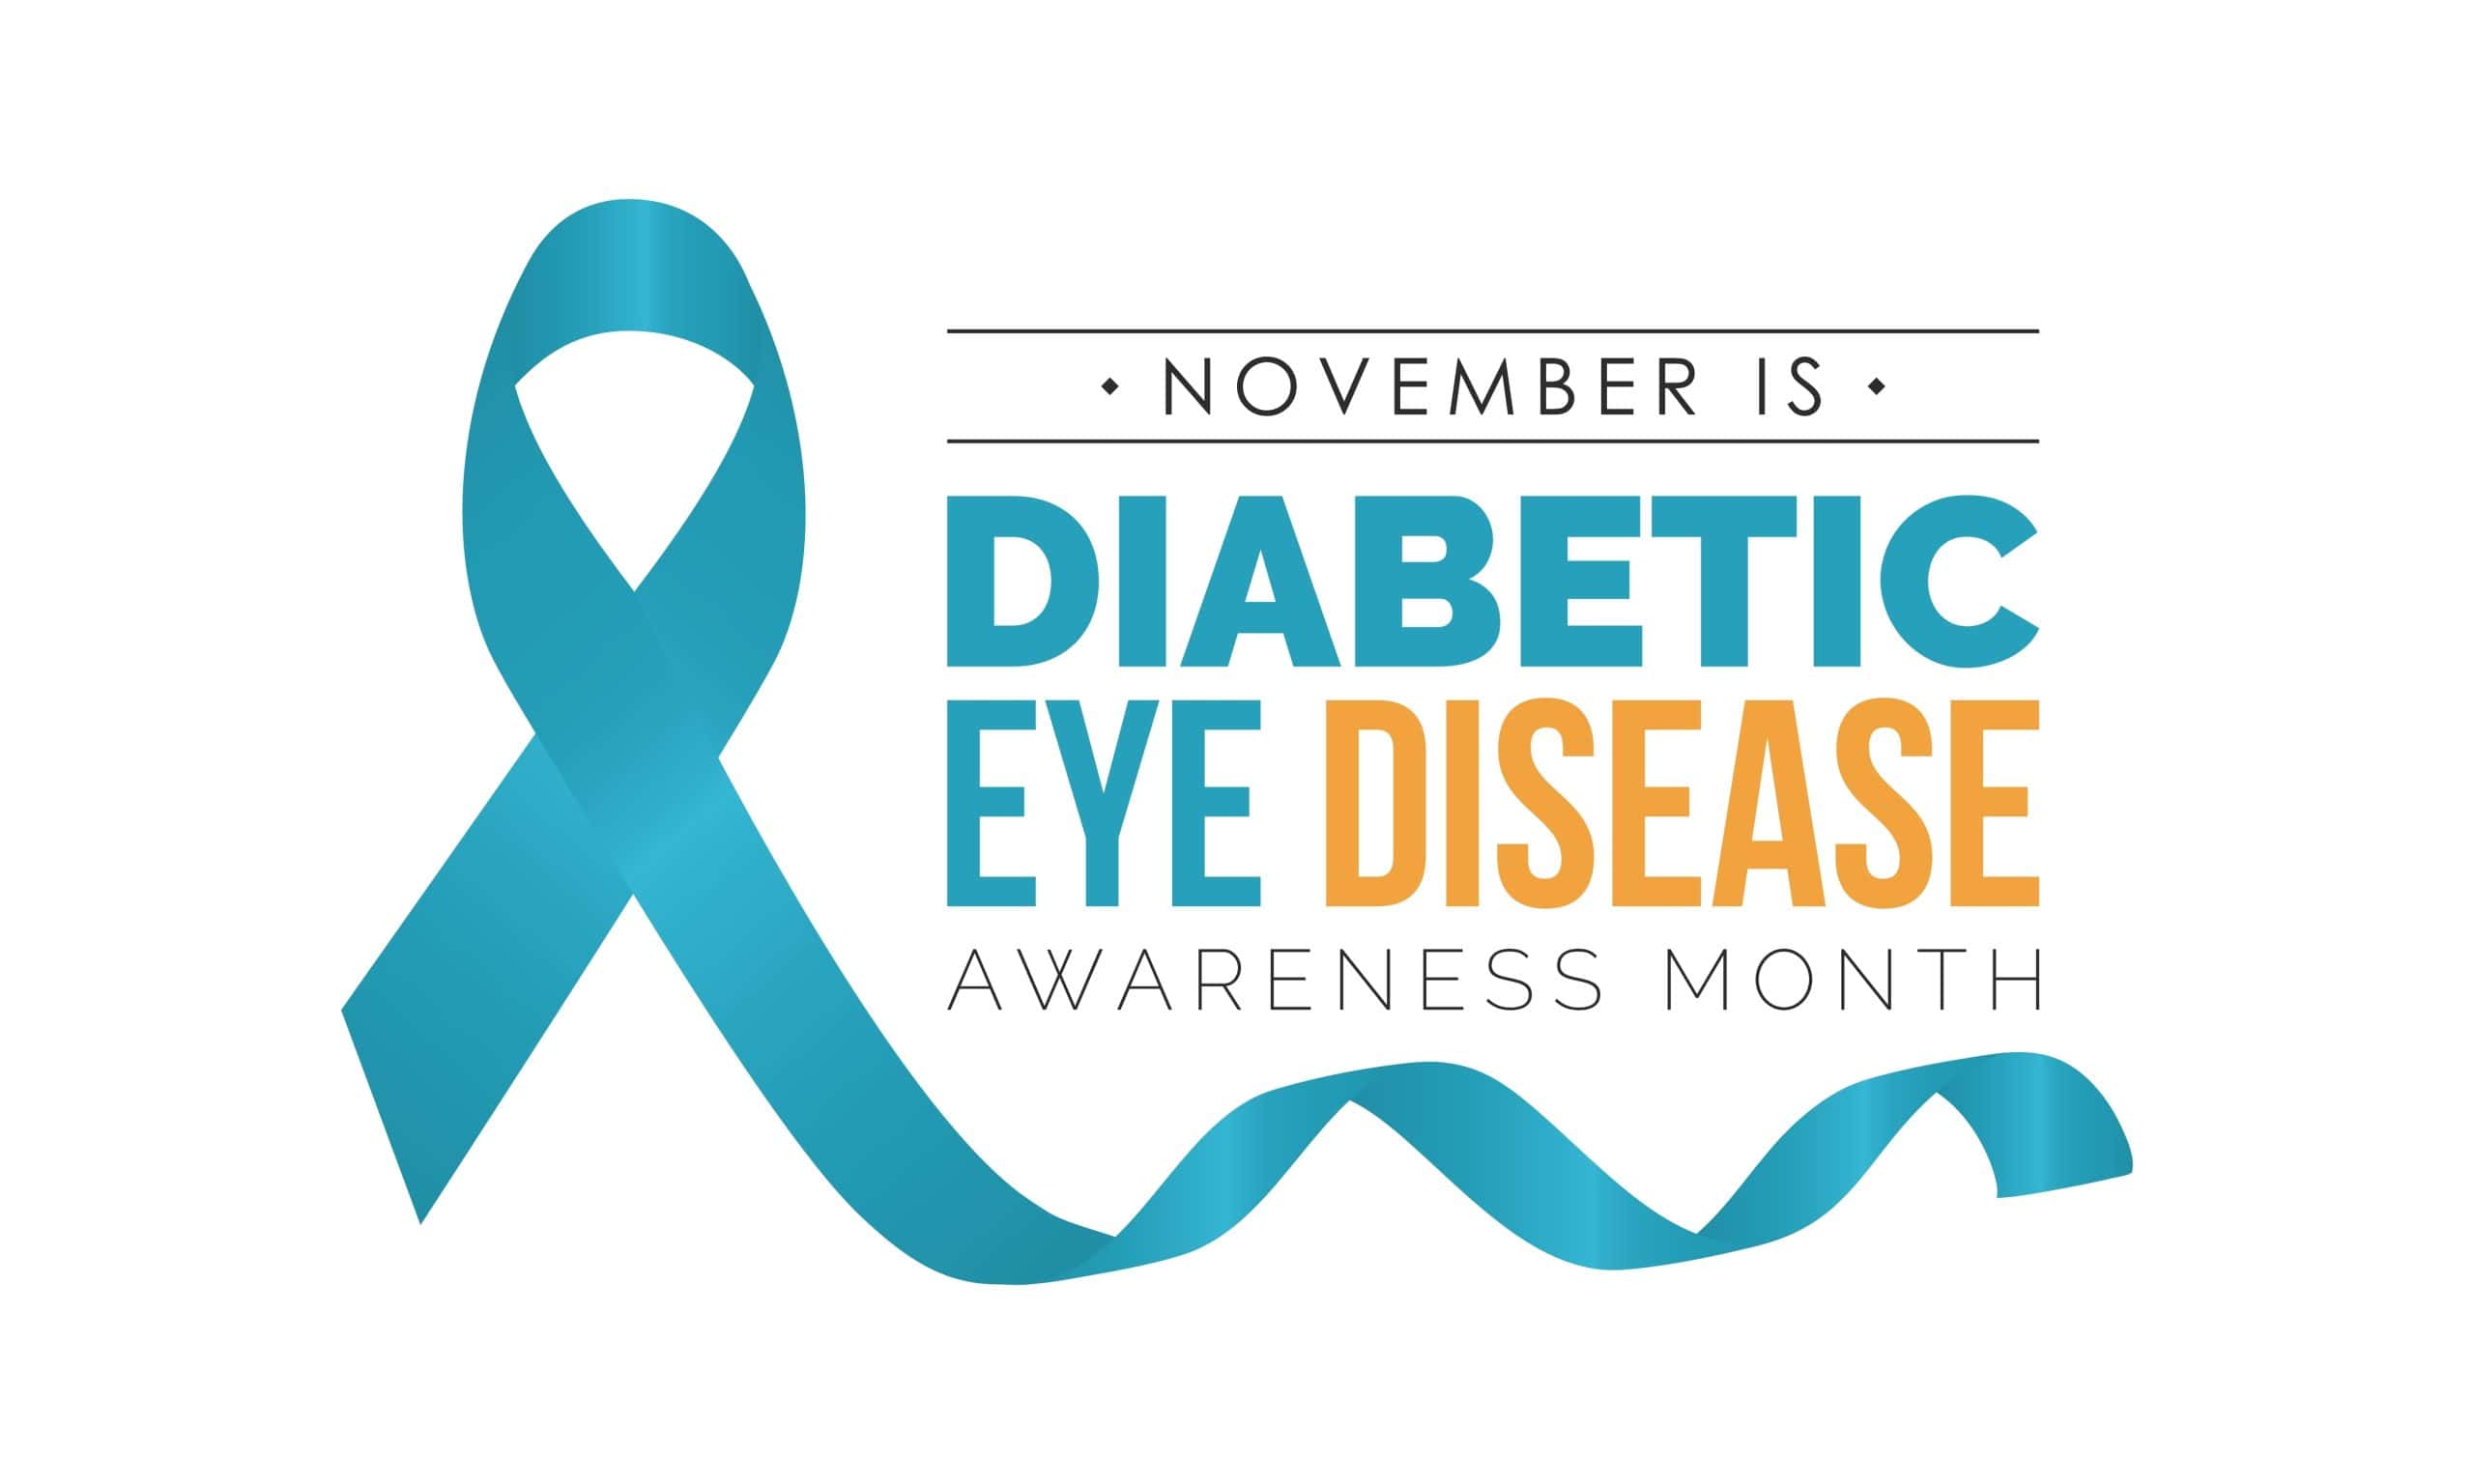 It’s Diabetic Eye Disease Awareness Month: Here’s What You Should Know